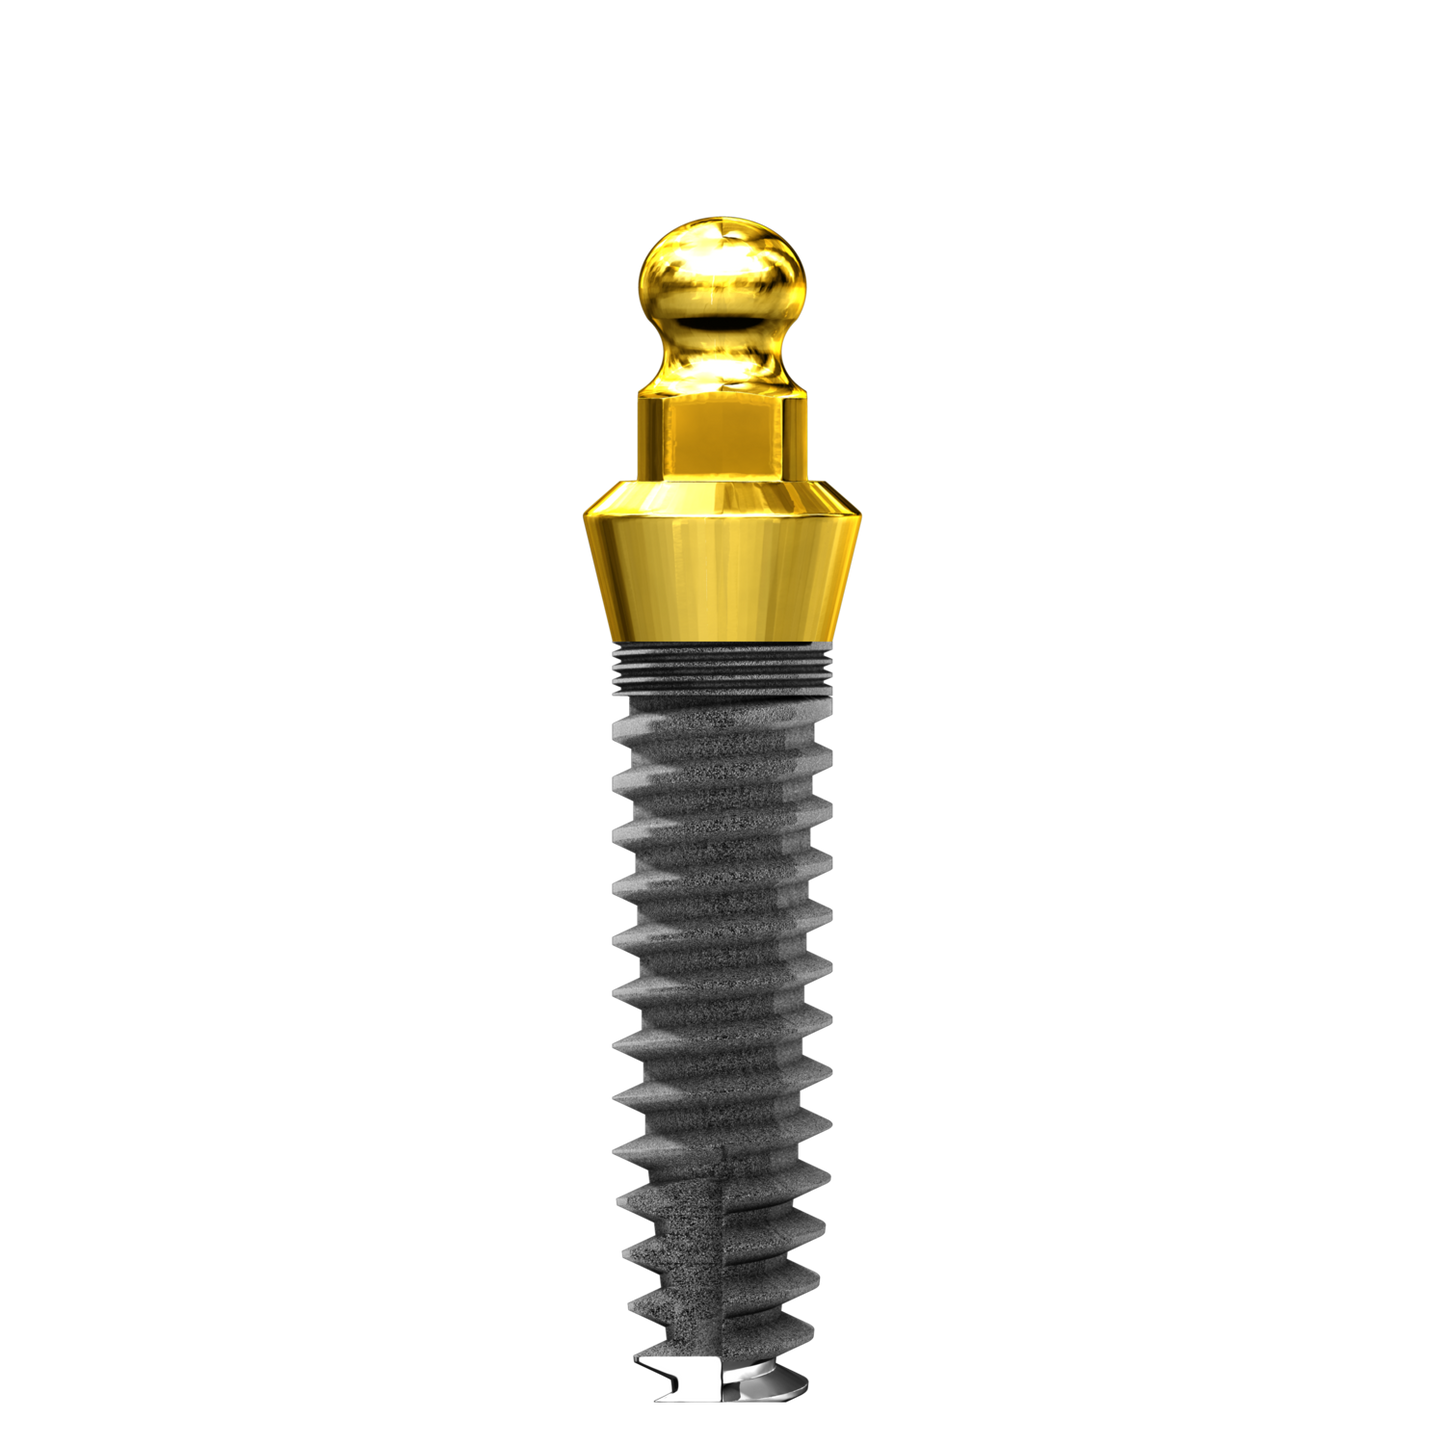 4.0mm x 14mm ISI O-Ball One Piece Implant